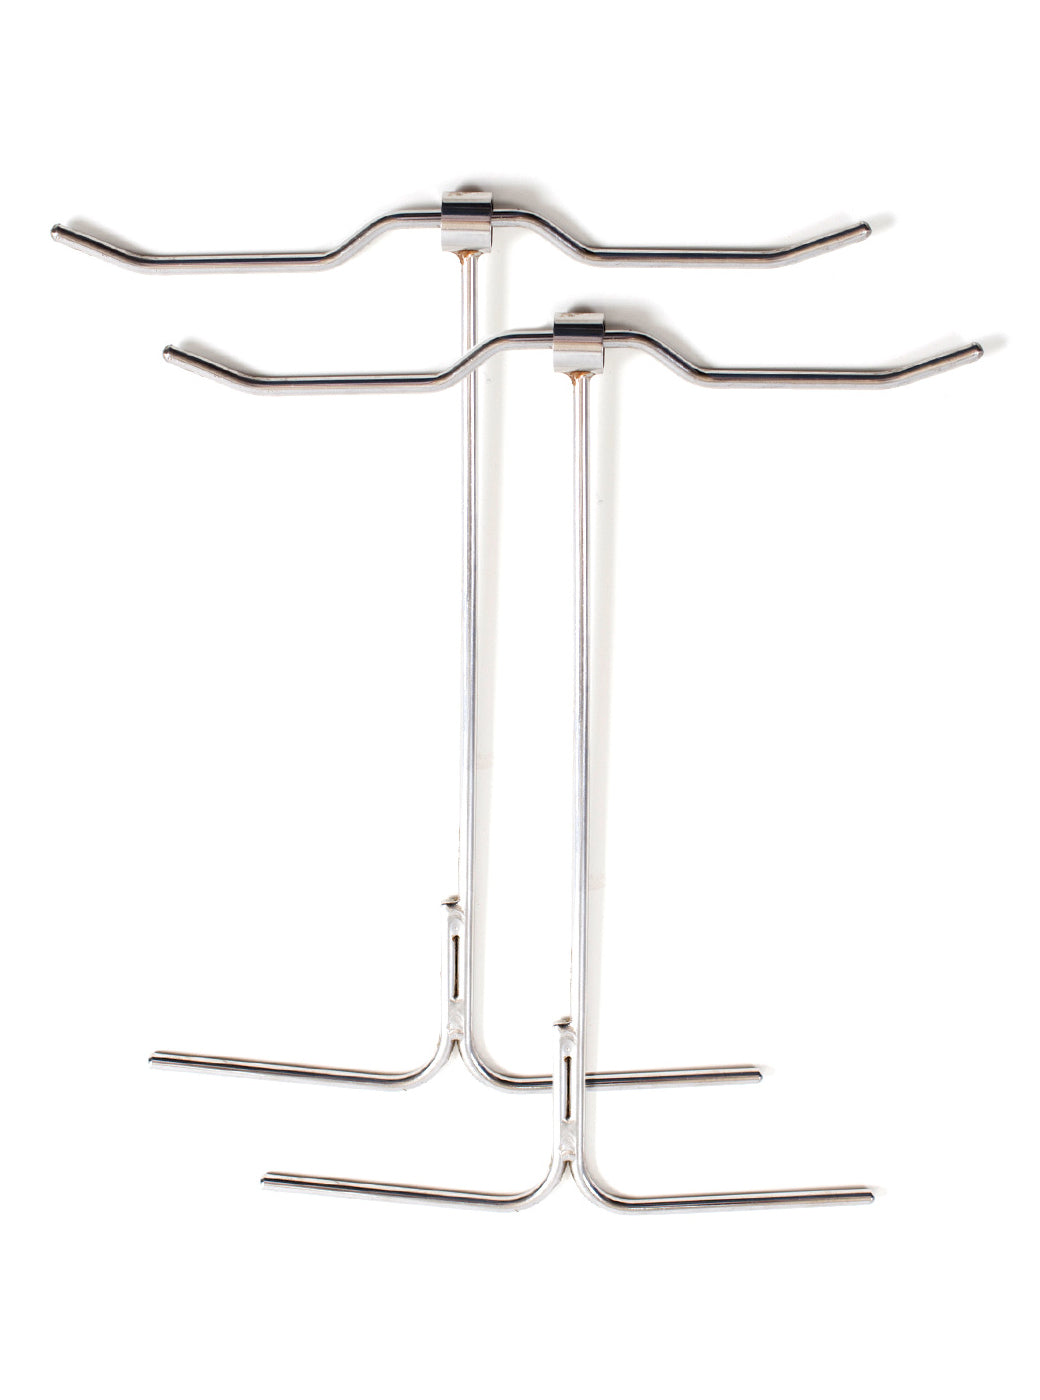 Image of Stainless-Steel Poultry Hanger Value Pack